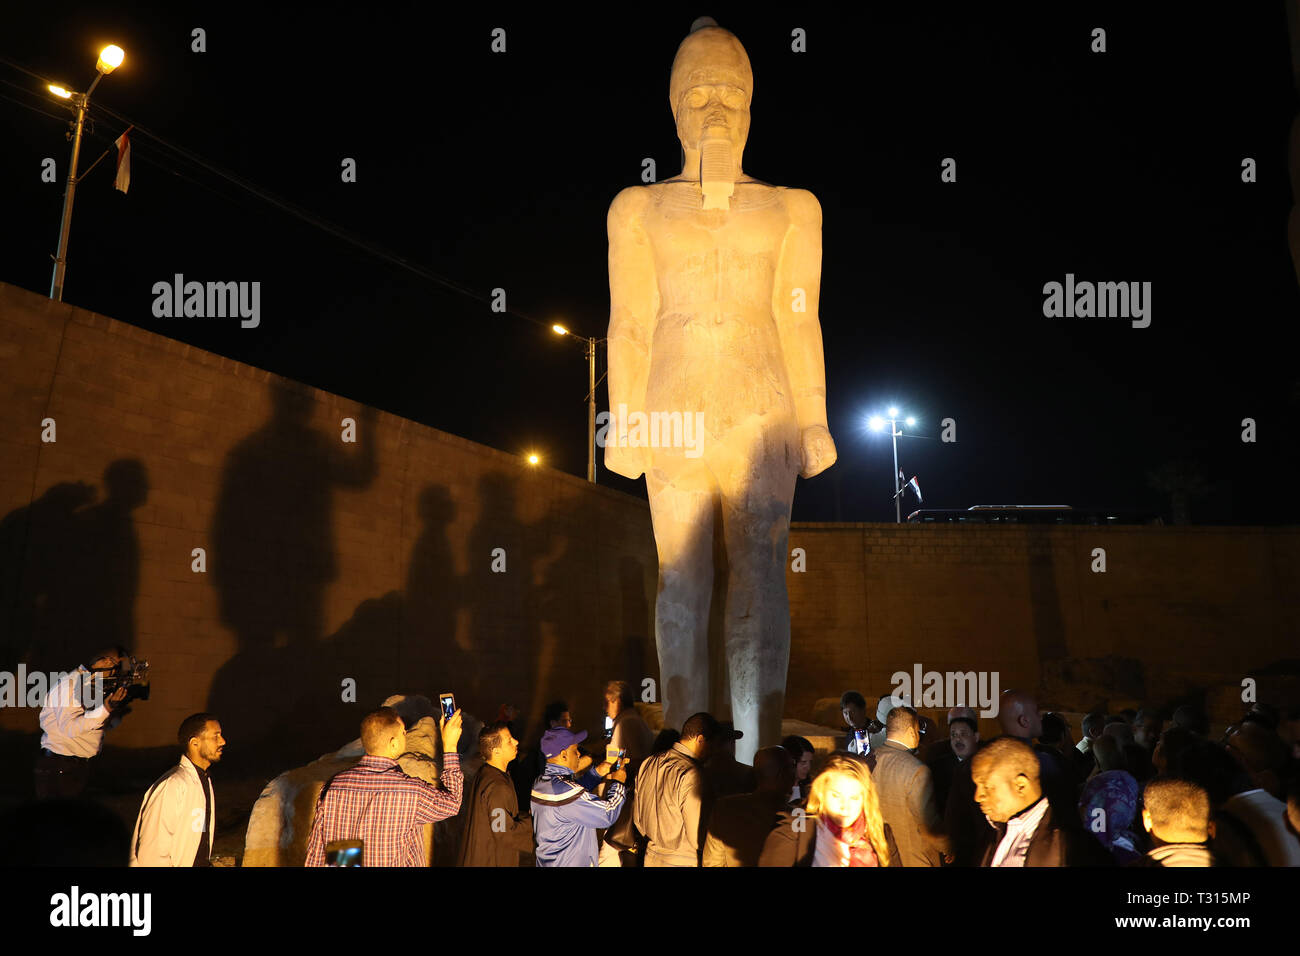 Sohag, Egypt. 5th Apr, 2019. People view a revived statue of Ramses II in Sohag, Egypt, April 5, 2019. Egyptian archeologists have pieced on Friday 70 fragments to revive a large statue of Ramses II in the upper Egypt's province of Sohag. Ramses II was the third pharaoh of the Nineteenth Dynasty of Egypt and was considered the strongest pharaoh of the New Kingdom that spans from the 16th century BC to the 11th century BC. Credit: Ahmed Gomaa/Xinhua/Alamy Live News Stock Photo